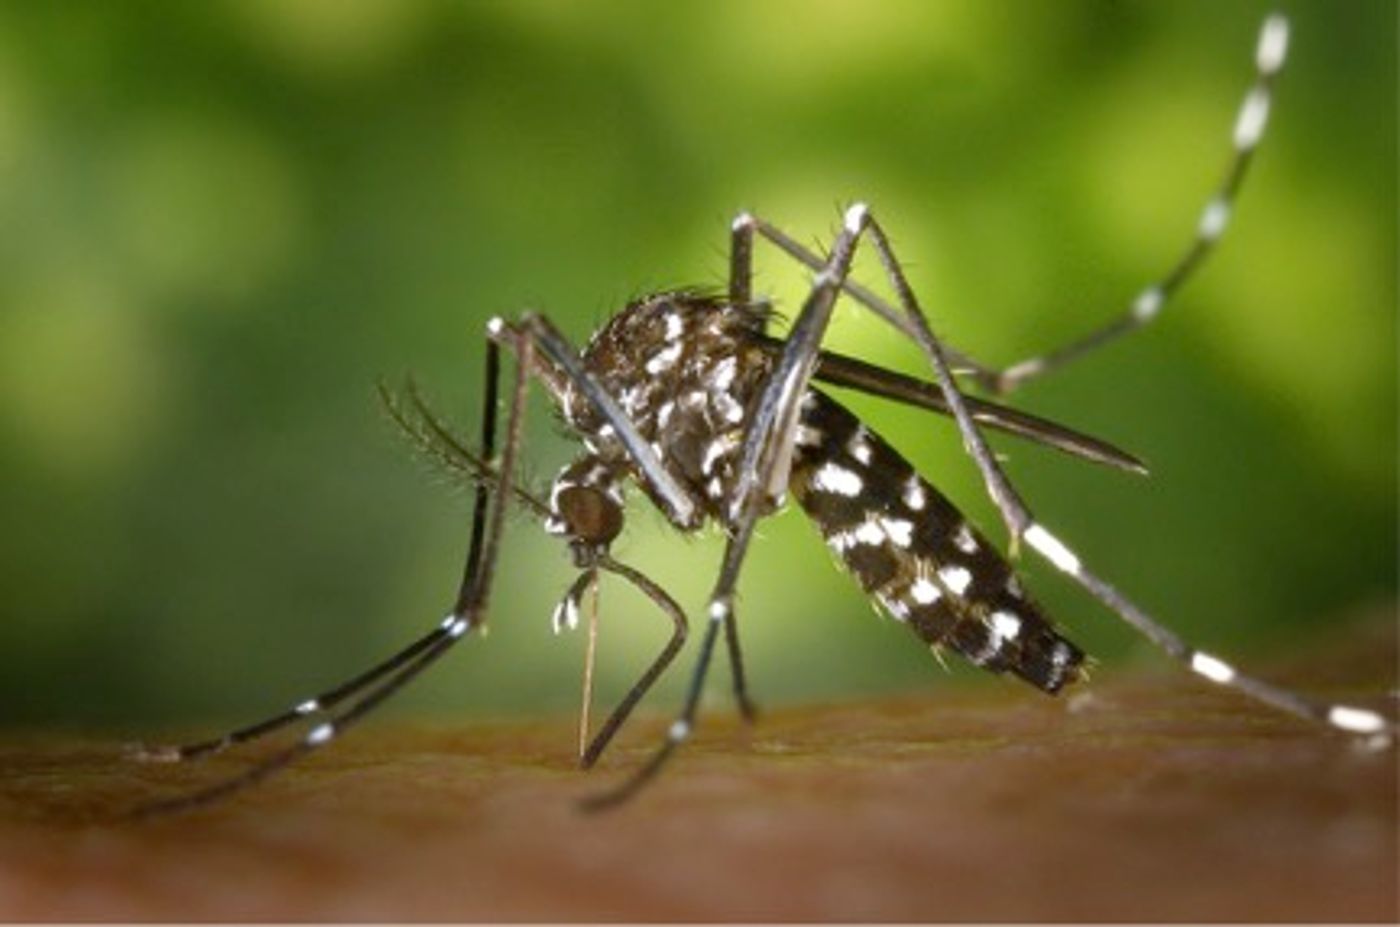 New test approved emergency use in Zika detection